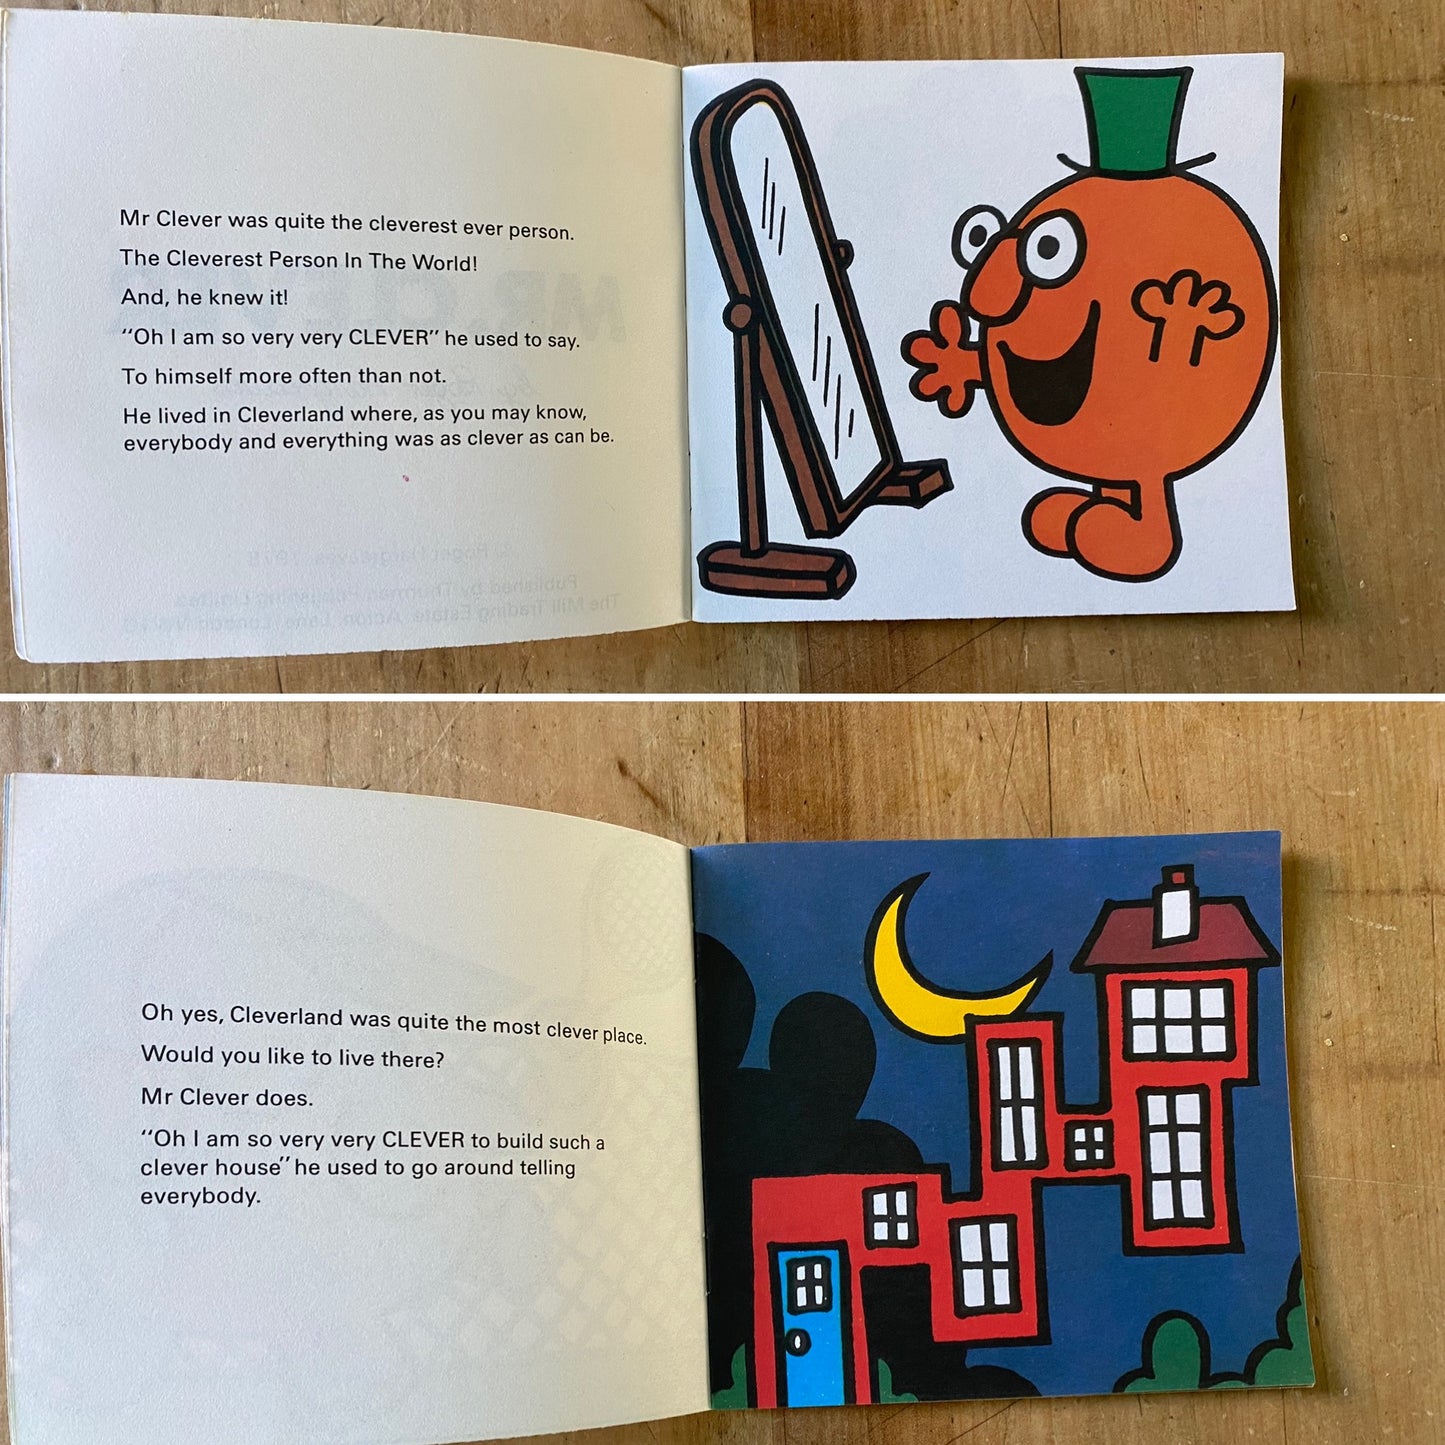 Mr. Clever by Roger Hargreaves. Original 1970s The Mr Men series. 1978  edition.Great gift idea